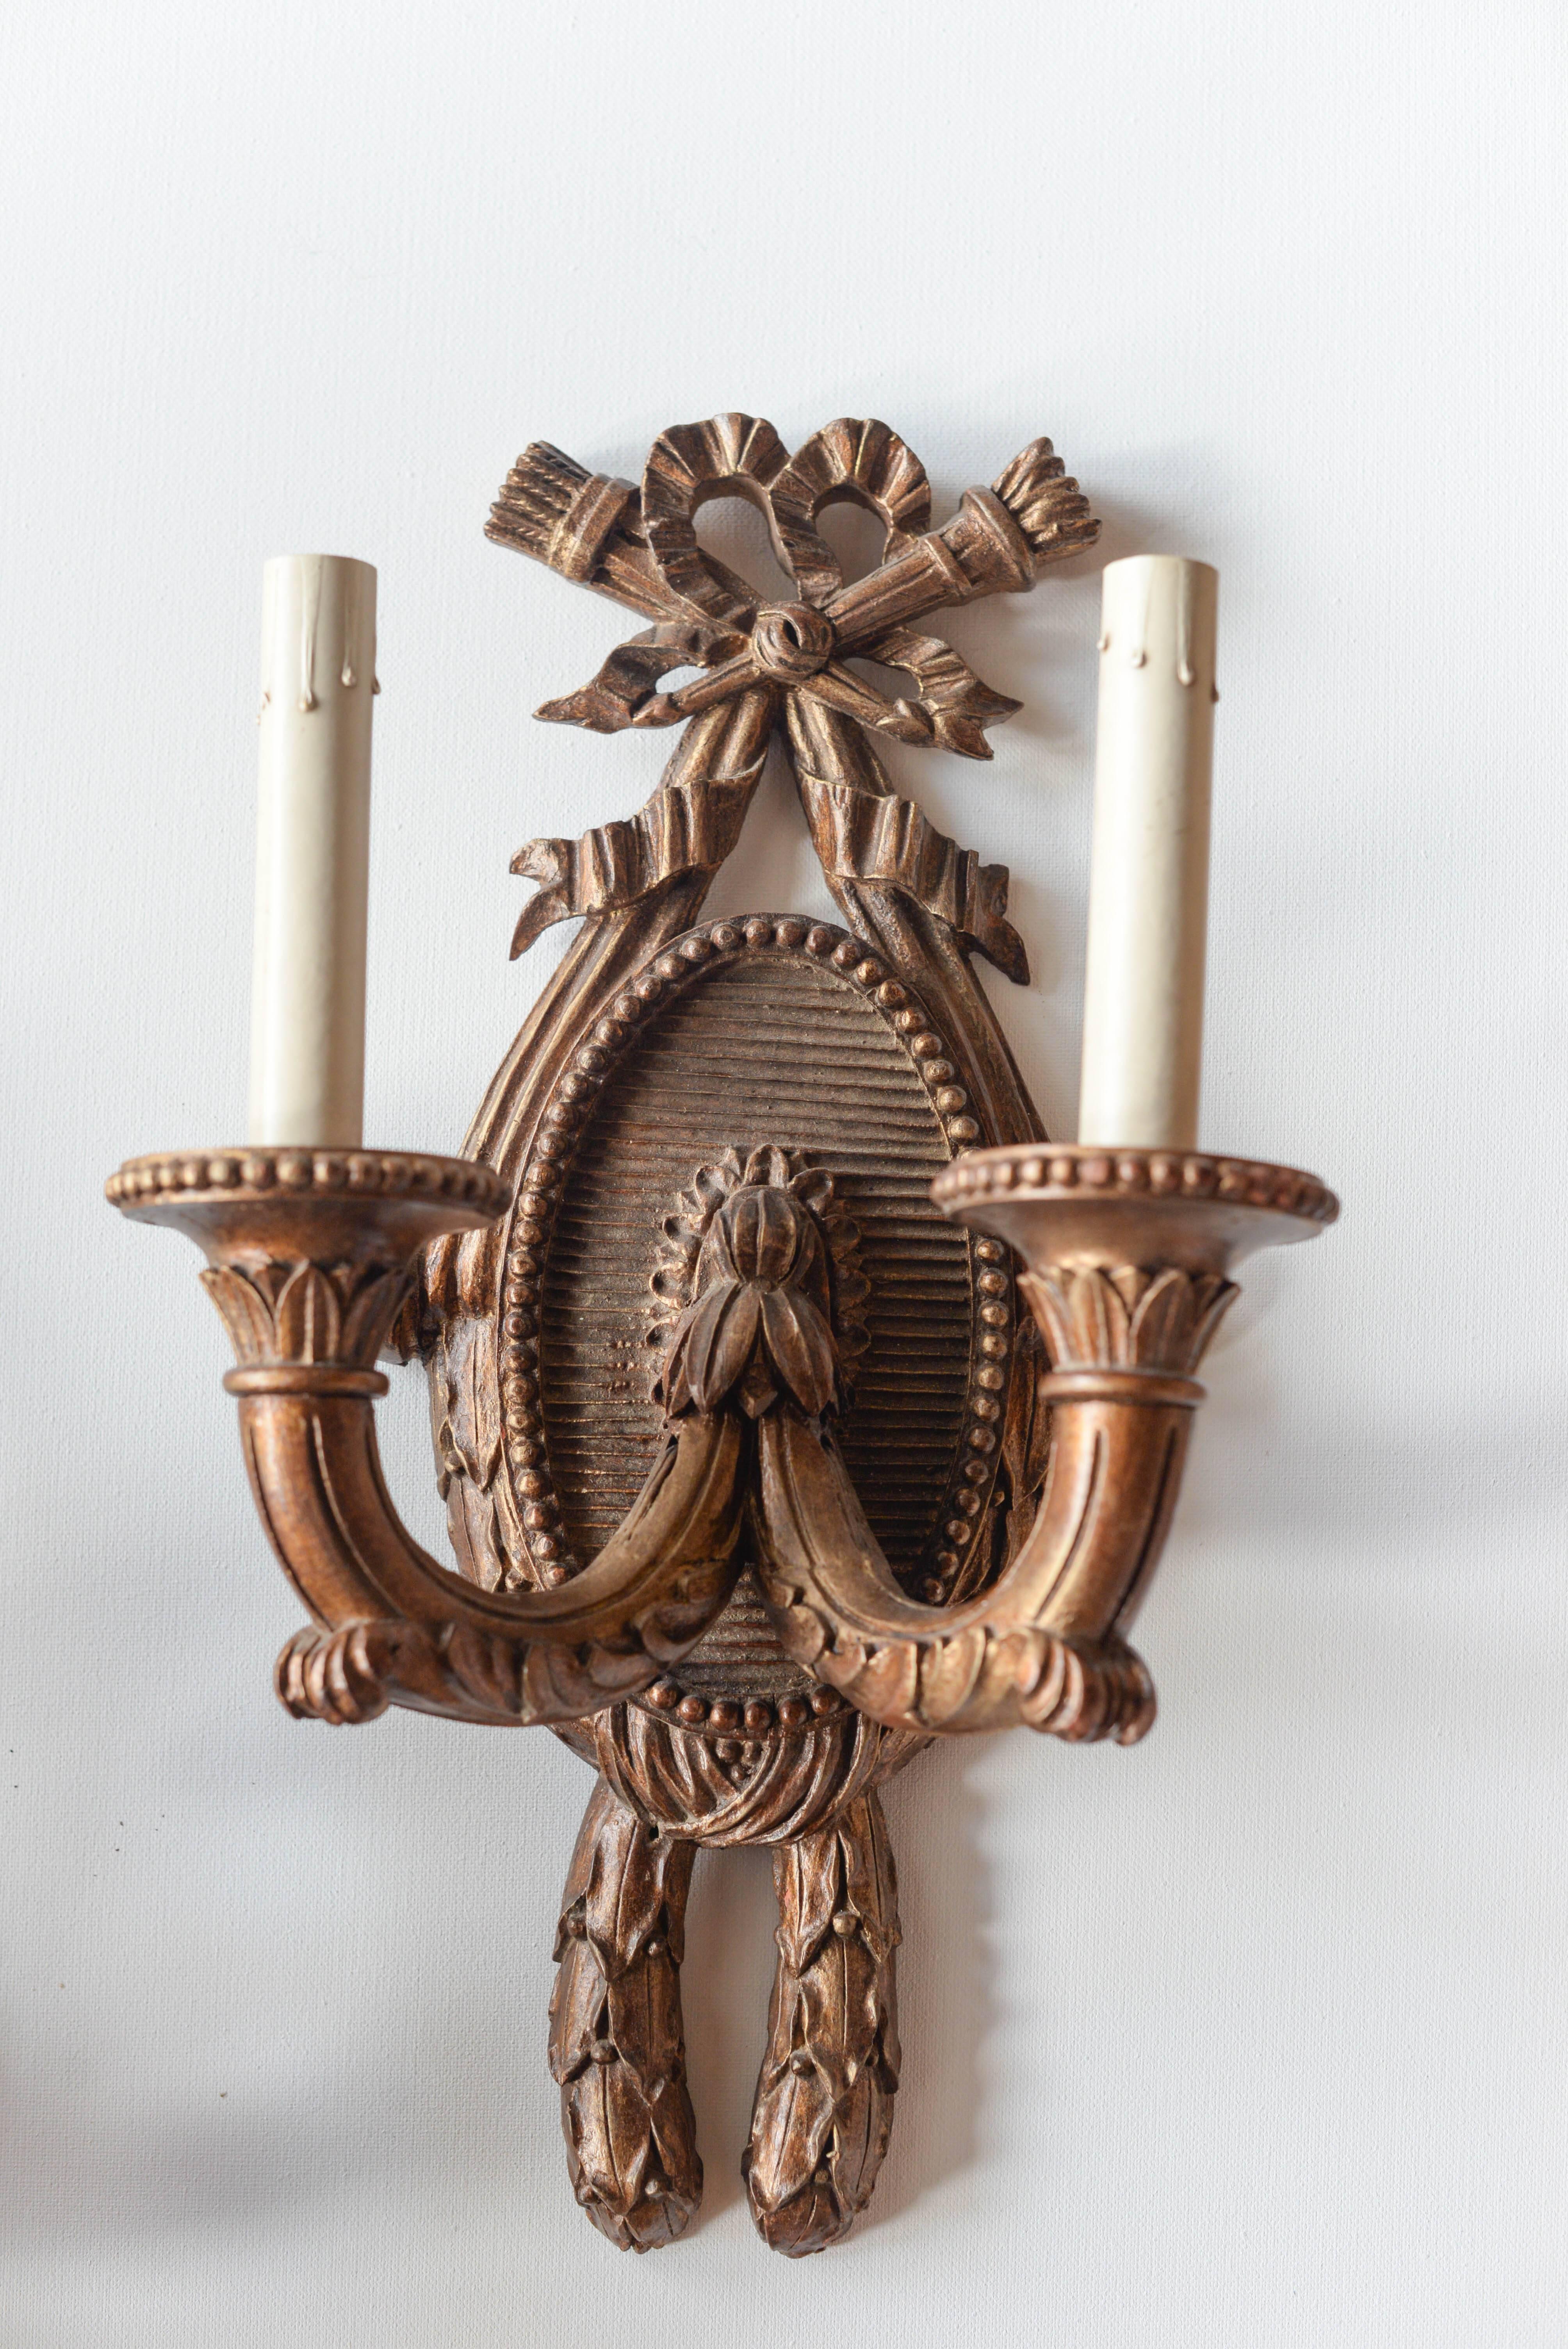 This pair of 19th Century French Carved Wood Sconces features on oval carved and beaded backplate with a lovely ribbon decoration.  The sconces have a gold / brown finish and have been newly rewired.